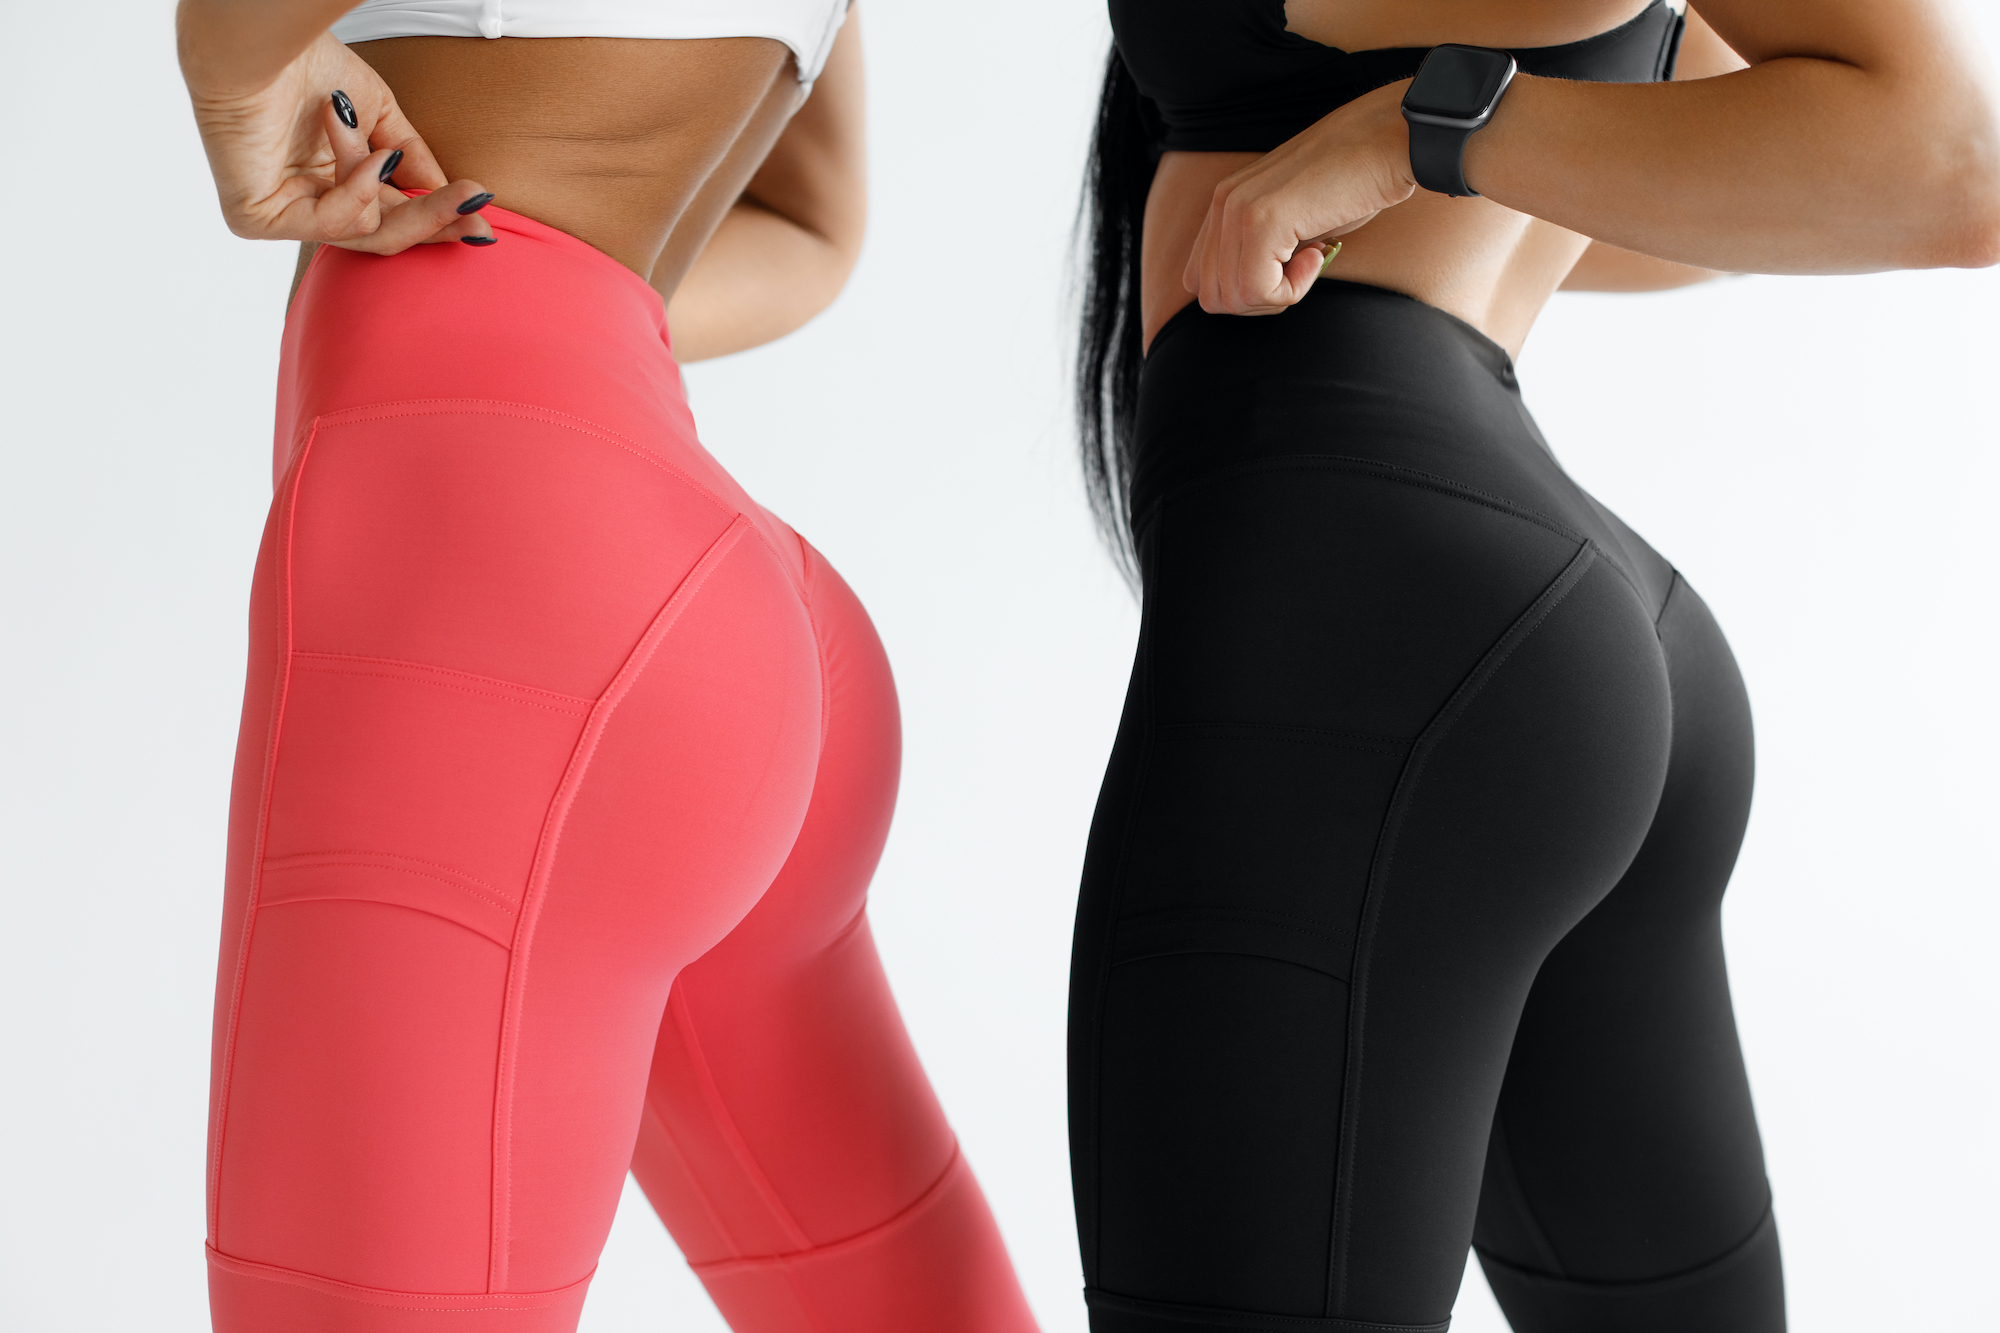 Seasum Booty Lifting Leggings Are a Hit With Over 54,000 Shoppers